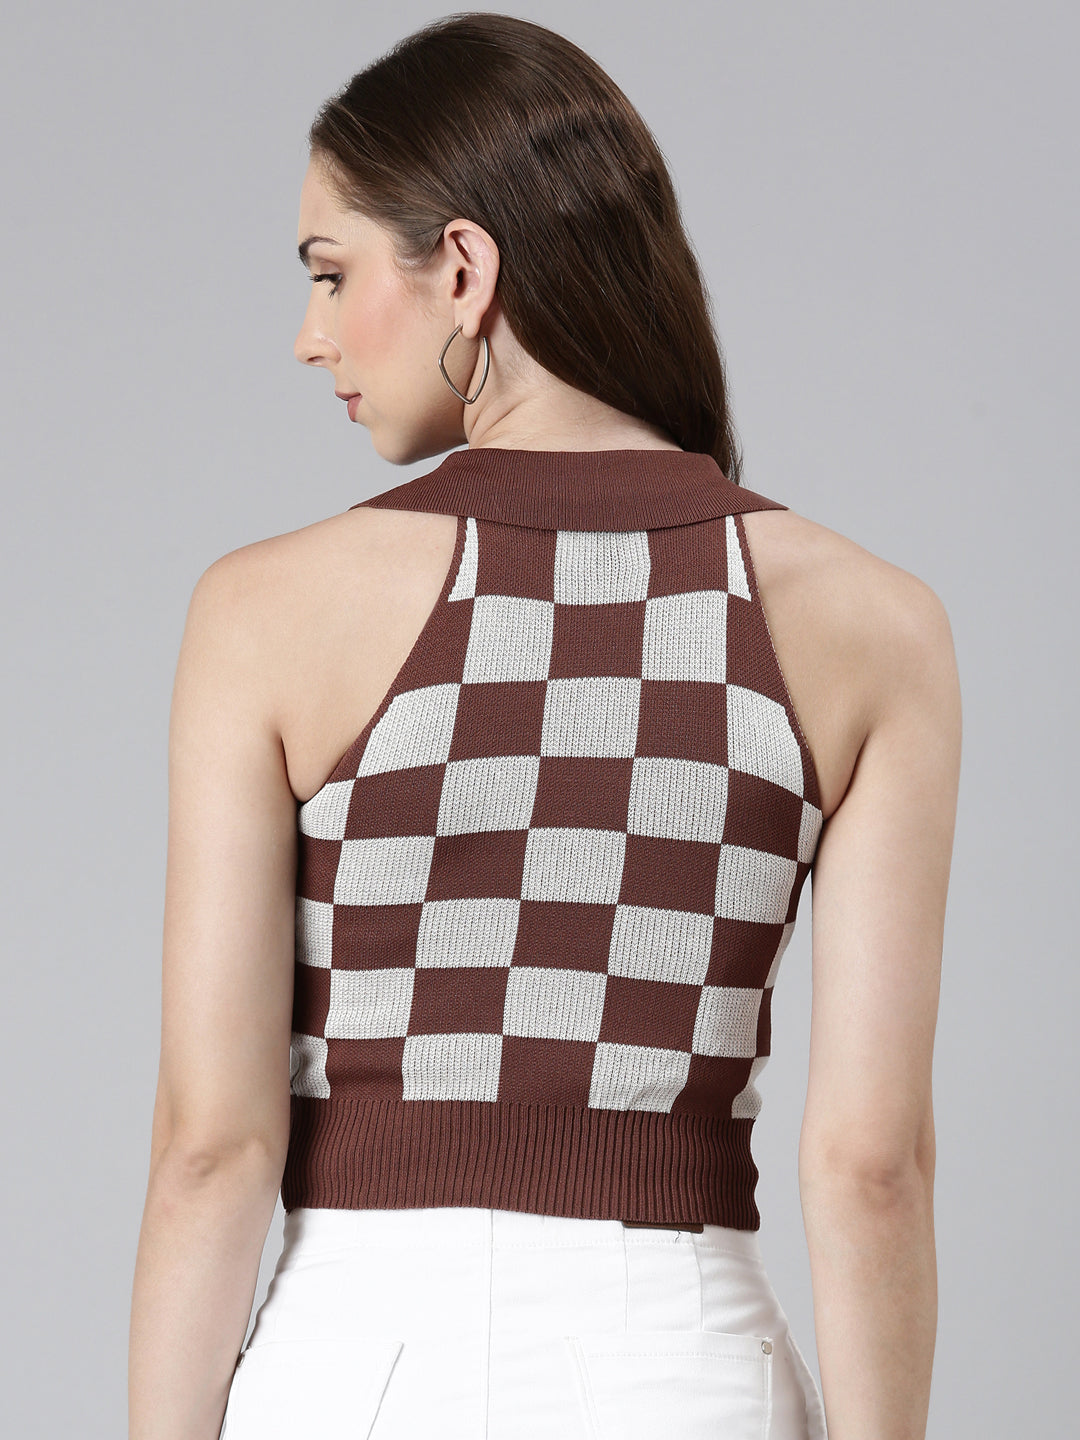 Above the Keyboard Collar Checked Coffee Brown Cinched Waist Crop Top